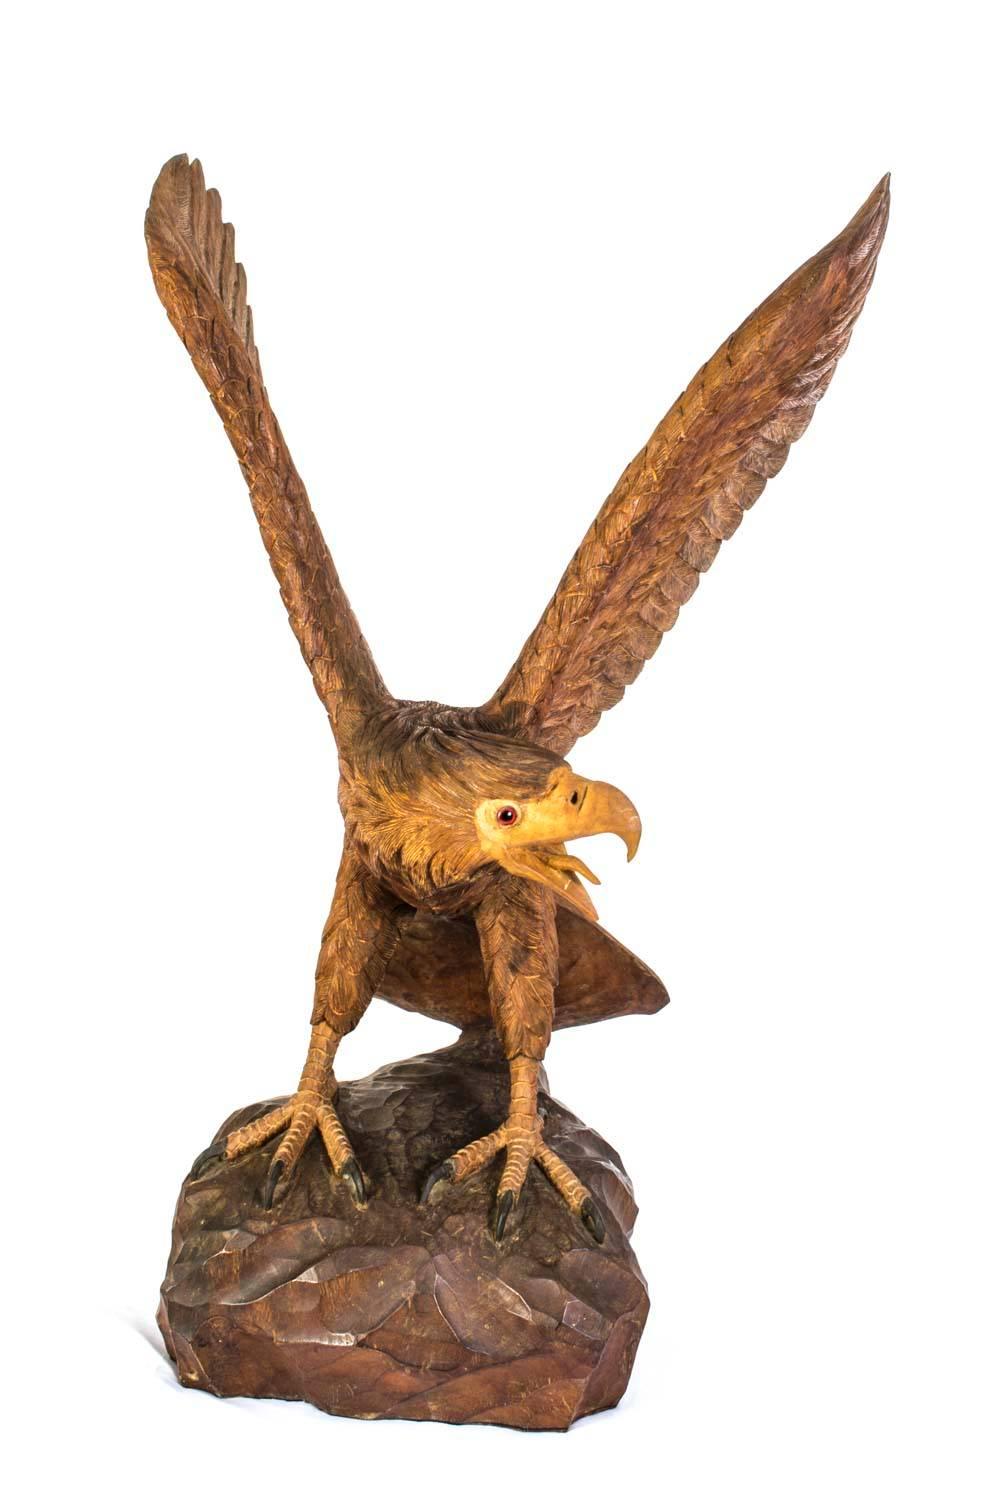 This is a truly impressive and enormous eagle with fully spread wings, dating from the last quarter of the 20th century.

It was hand-carved from mahogany.

The attention to detail is absolutely fantastic and really brings him to life.

The